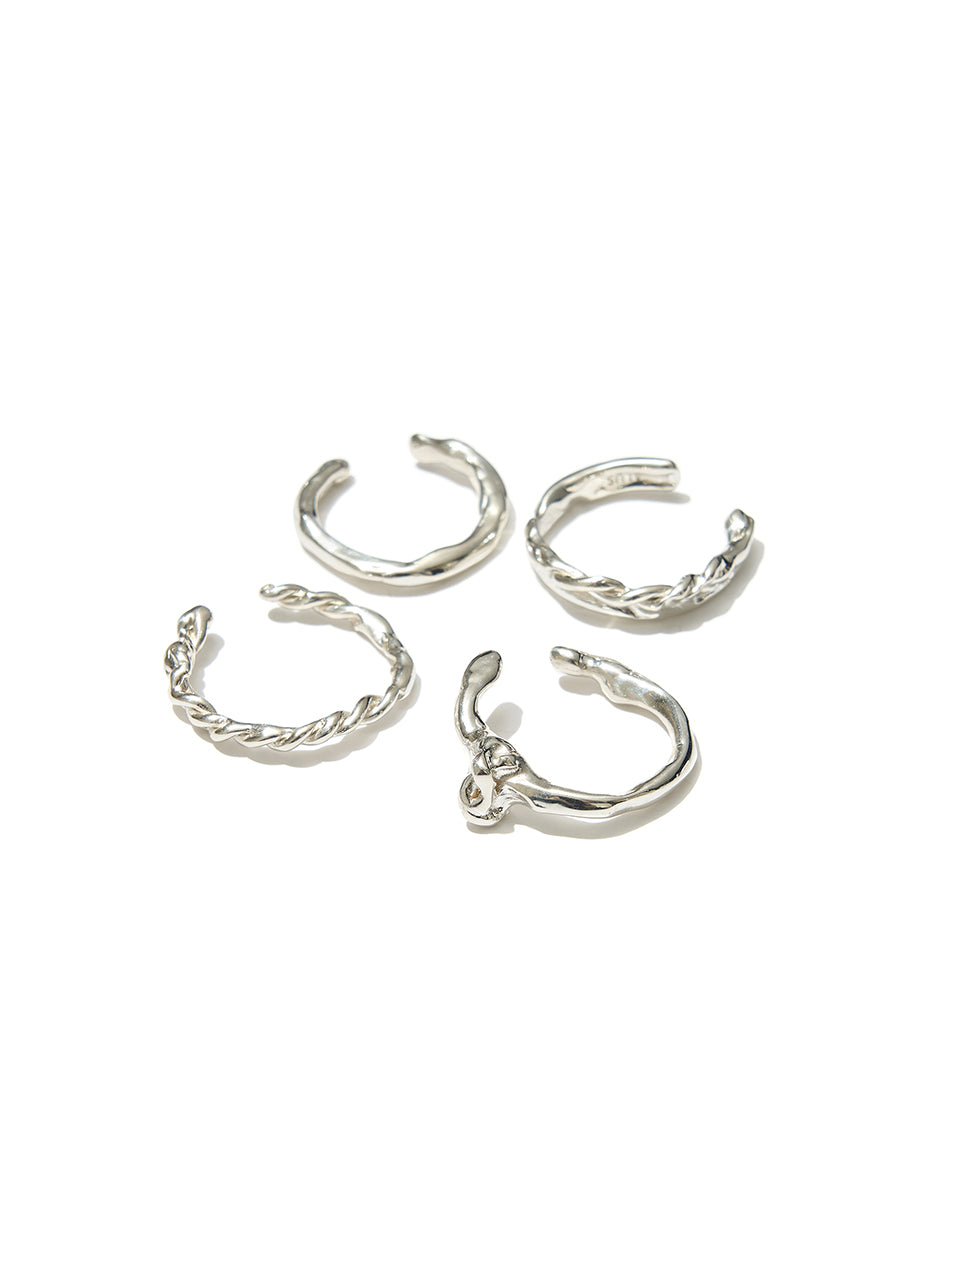 Knot ring no.1 (silver)